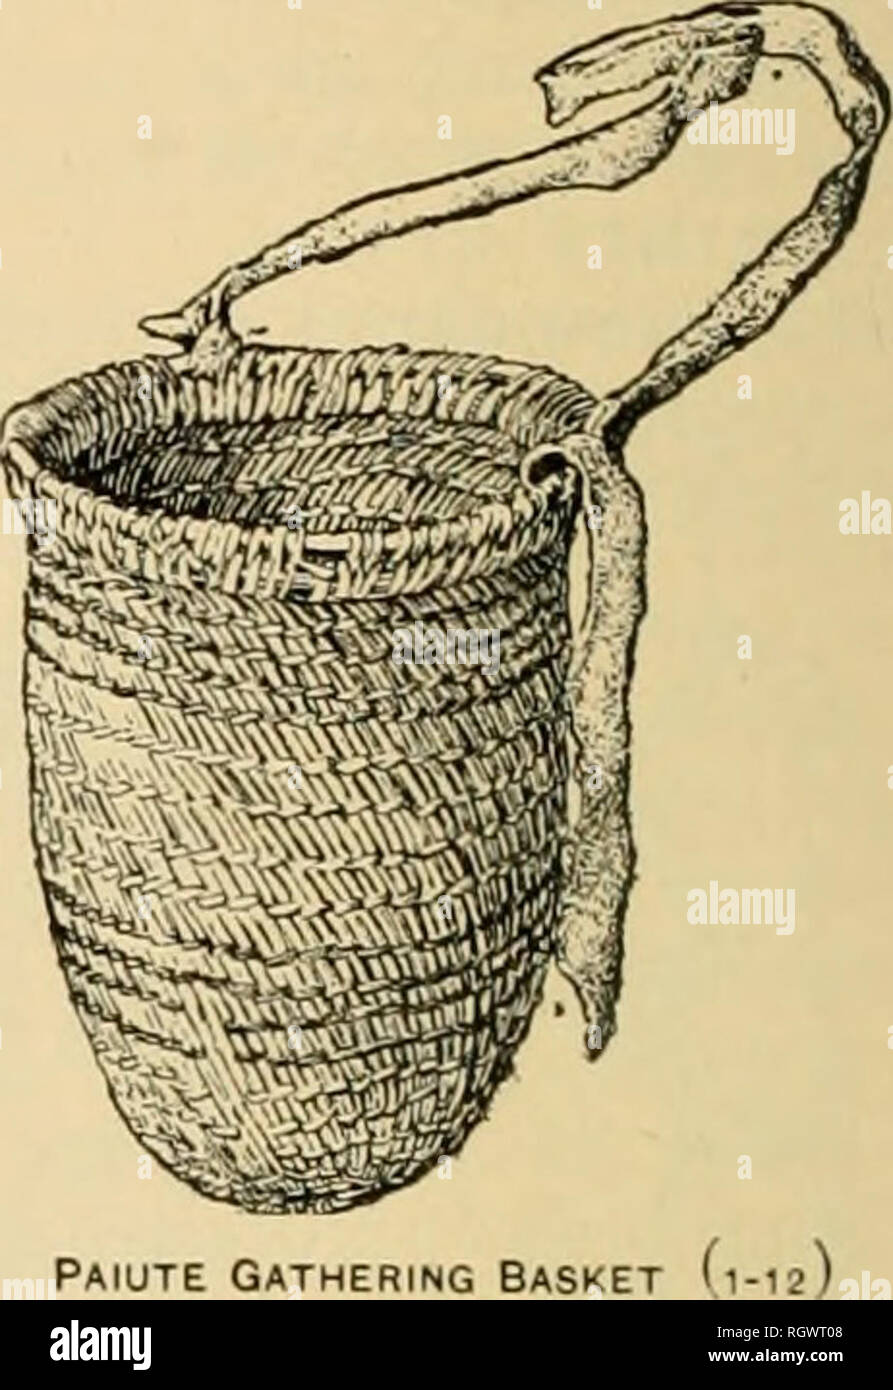 Bulletin. Ethnology. FORMS OF BASKETRY WEAVING. a, CHECKER; 6 TWILLED; c,  wicker; (I, wrapped; e, twined; /, cross-warp twined, g, WRAPPED TWINED; h,  IMBRICATE made water-tight for holding or carrying water